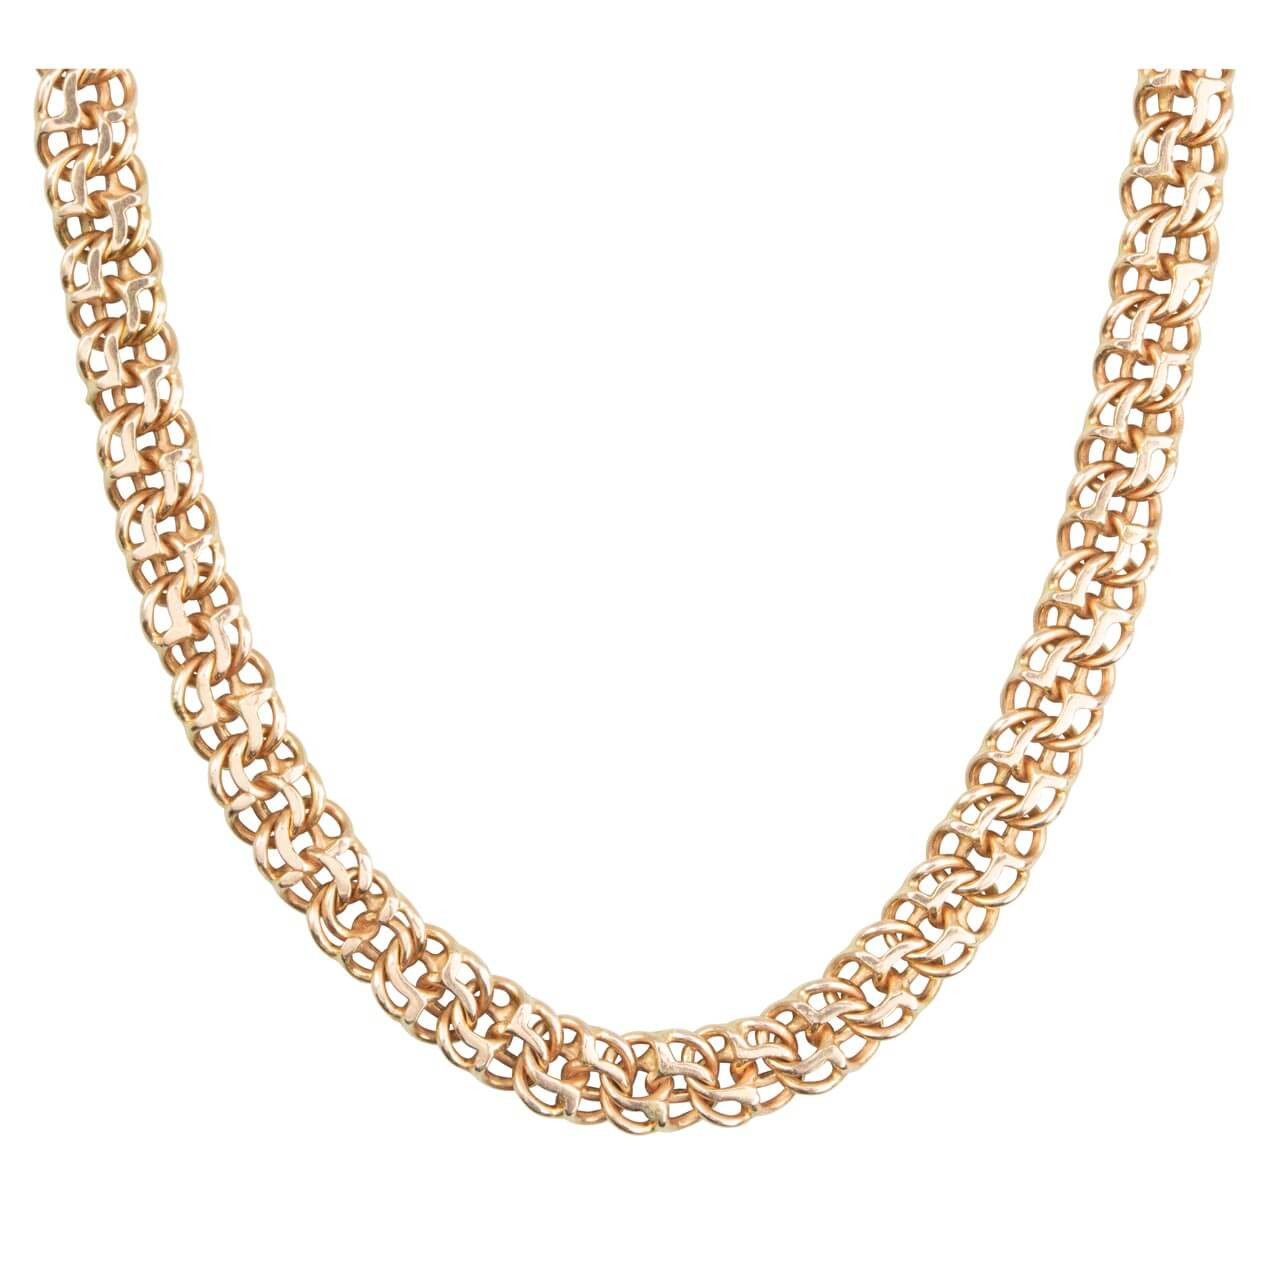 BTG FLAT 5MM Gold Necklace Stainless Steel 18K Gold Plated